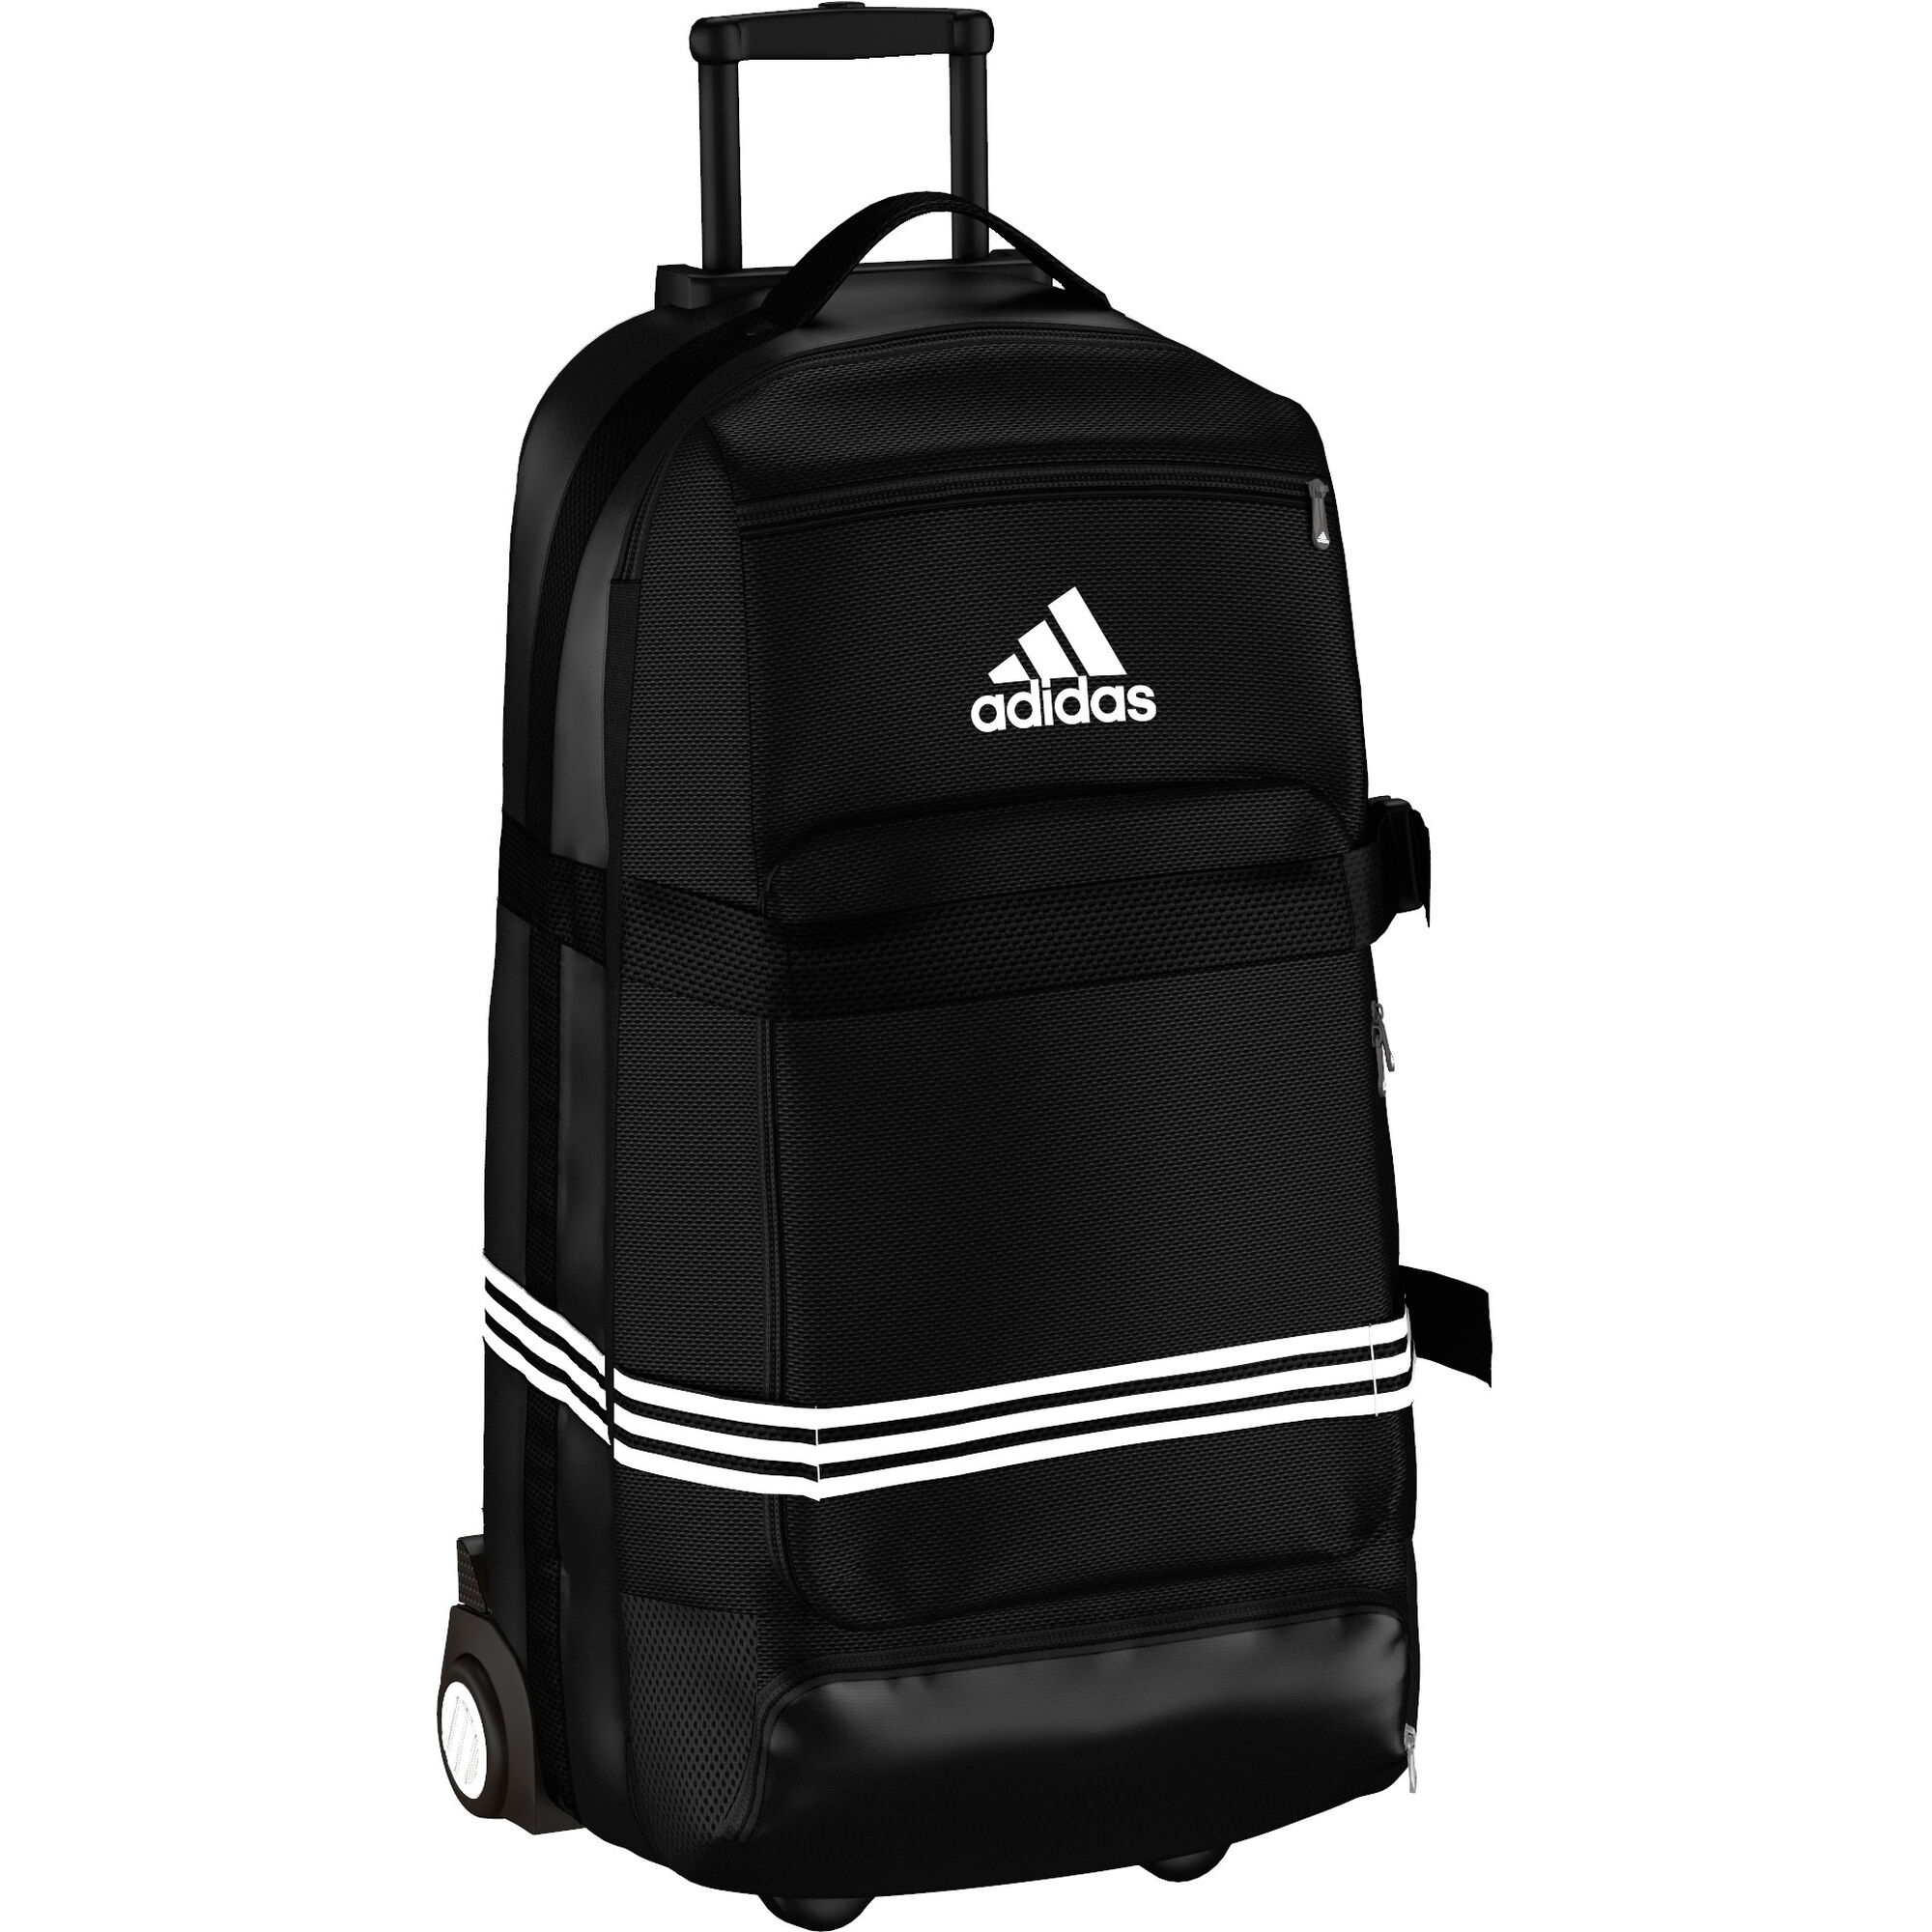 adidas travel bags with wheels